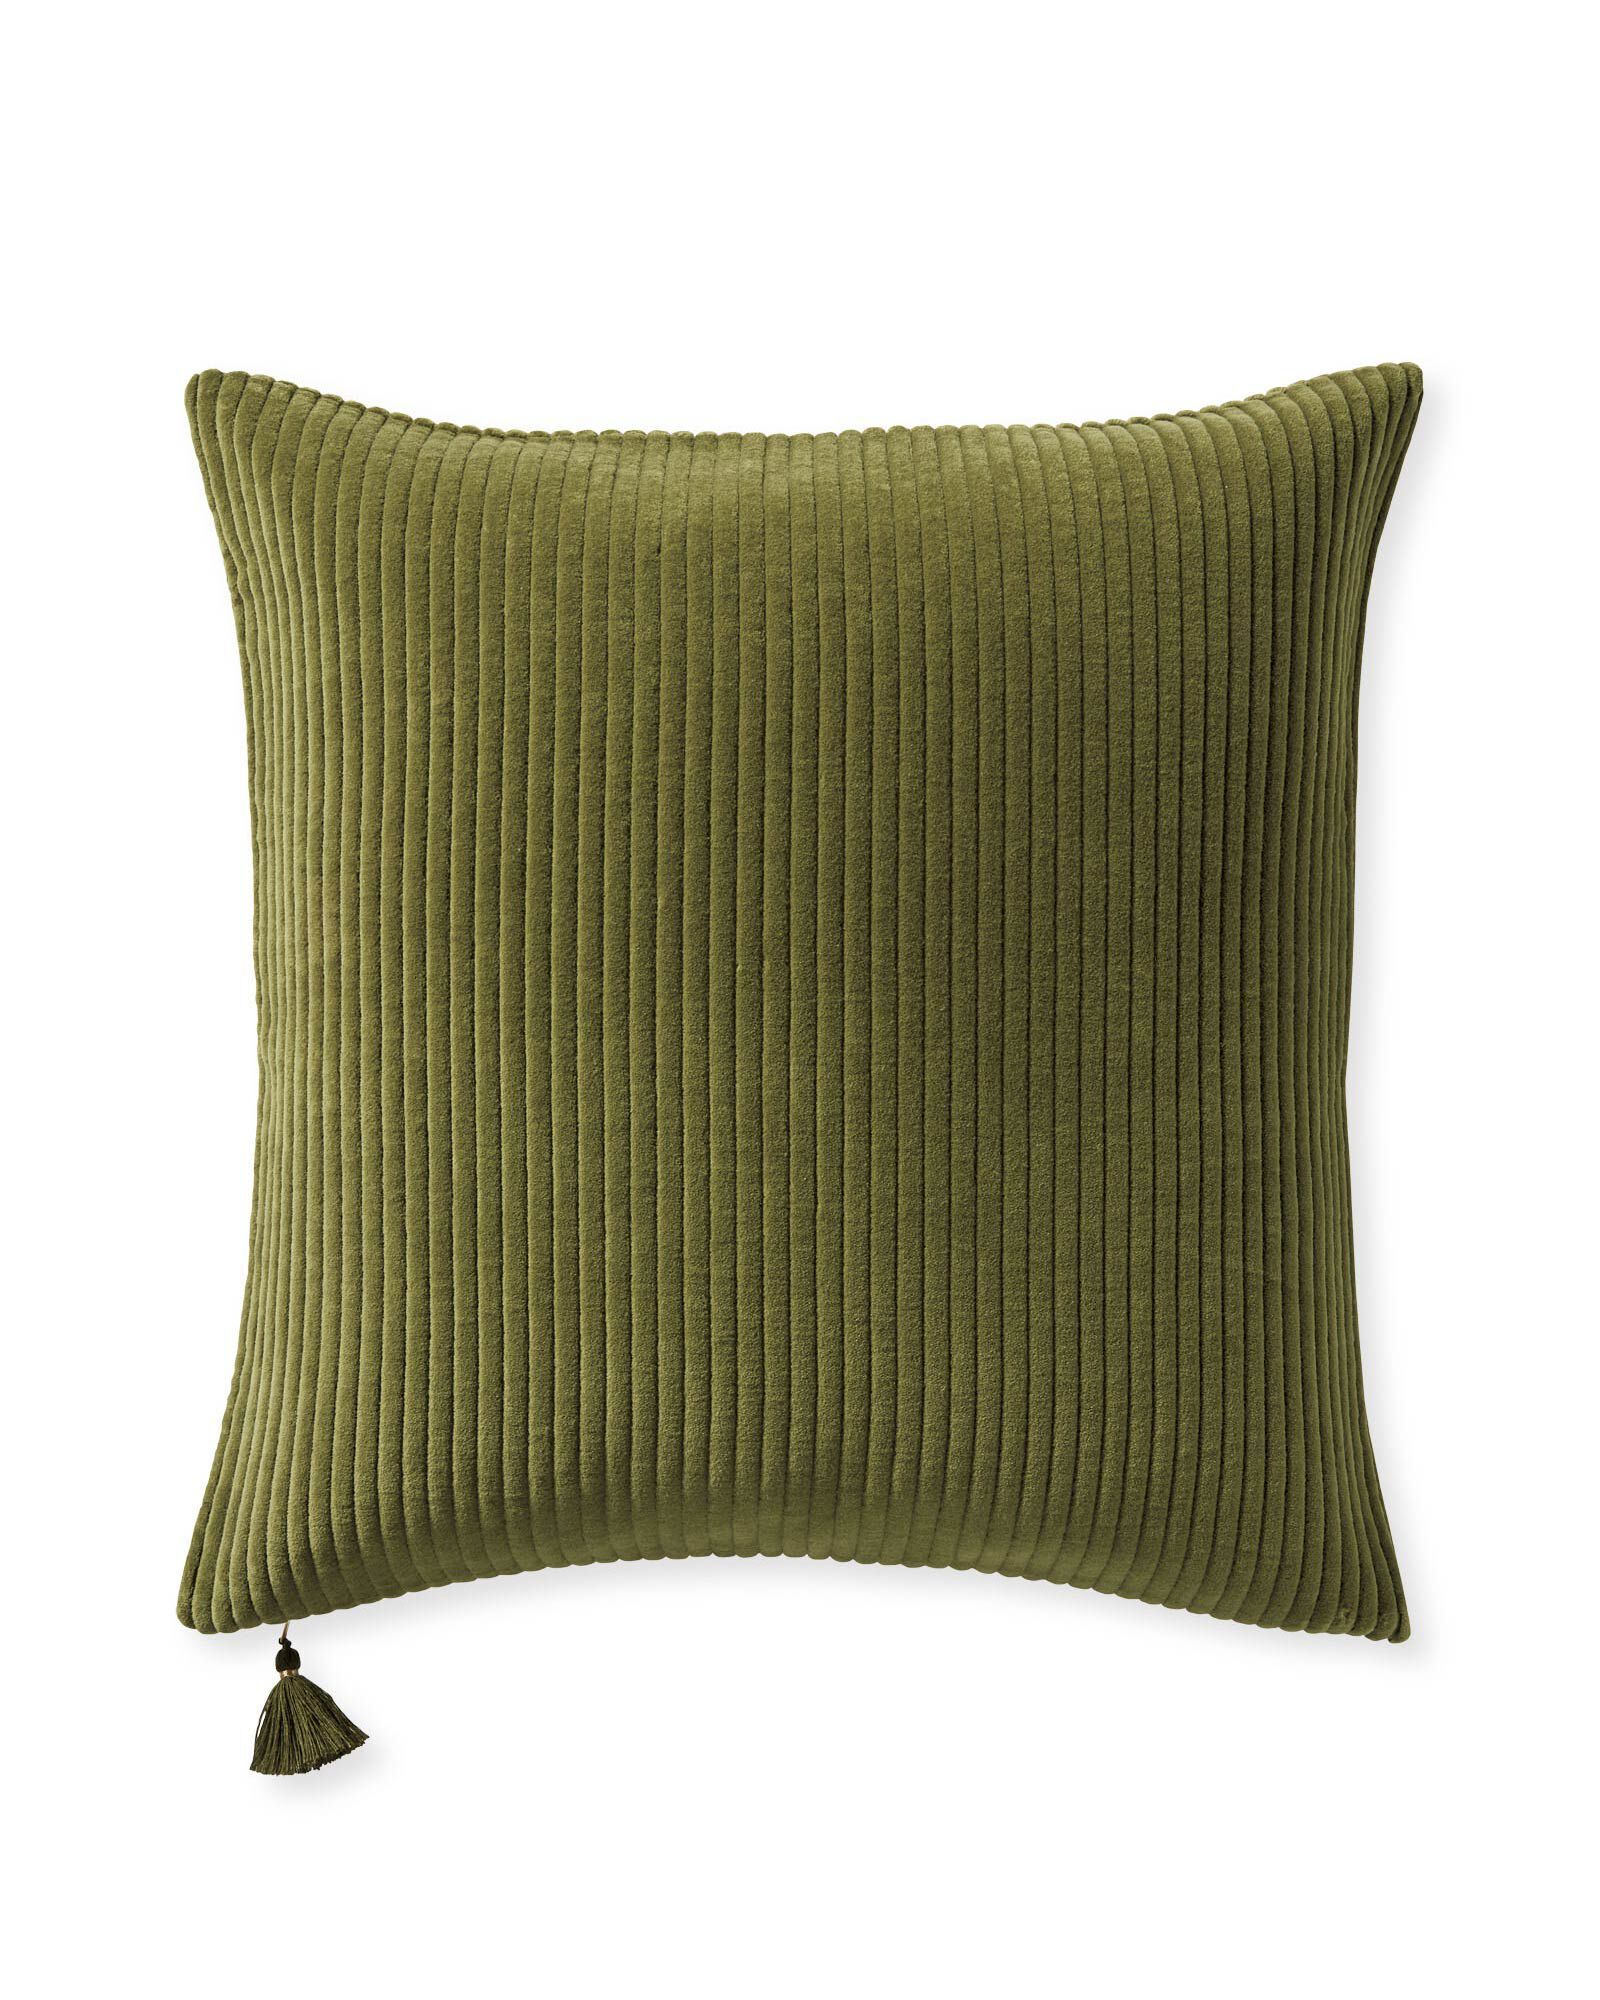 Corduroy Pillow Cover | Serena and Lily